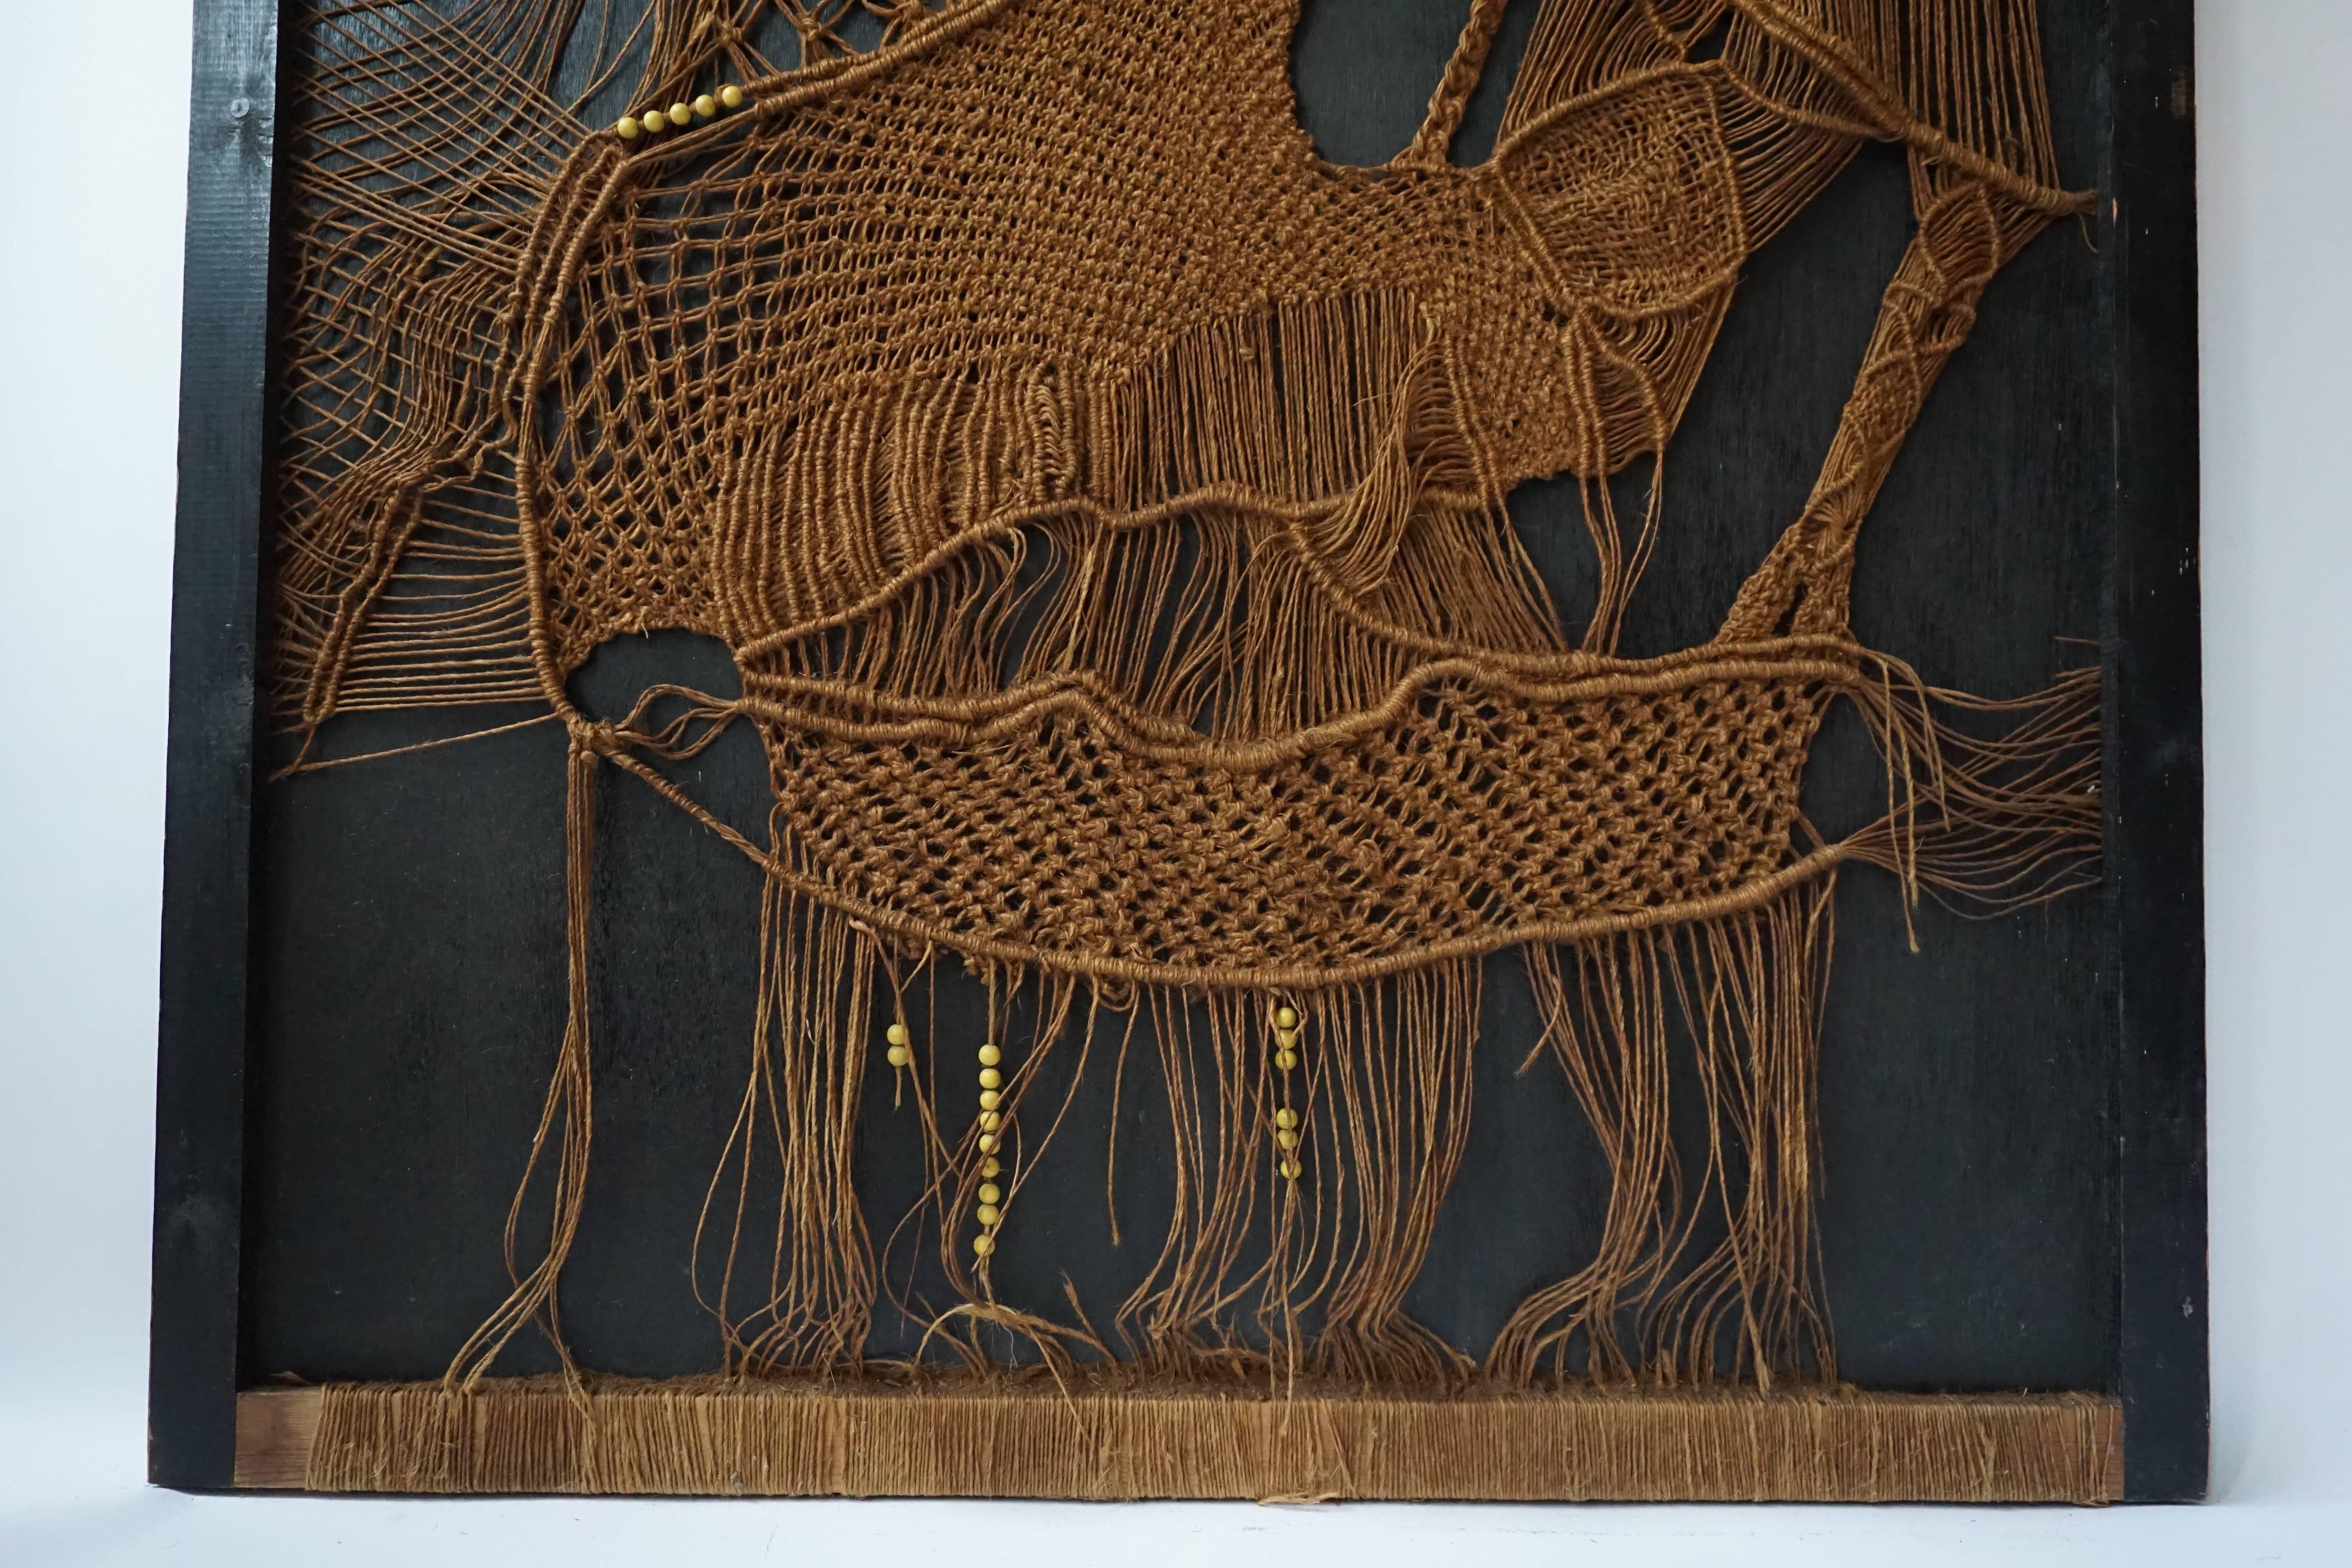 A 1960s–1970s so – called ‘ macramé ‘ panel of woven and beaded rope tapestry, representing an abstract pattern slightly reminiscing the figure of a bird, on a black painted wooden background.
Dimensions: 100 x 155 cm.

Some ropes are snapped